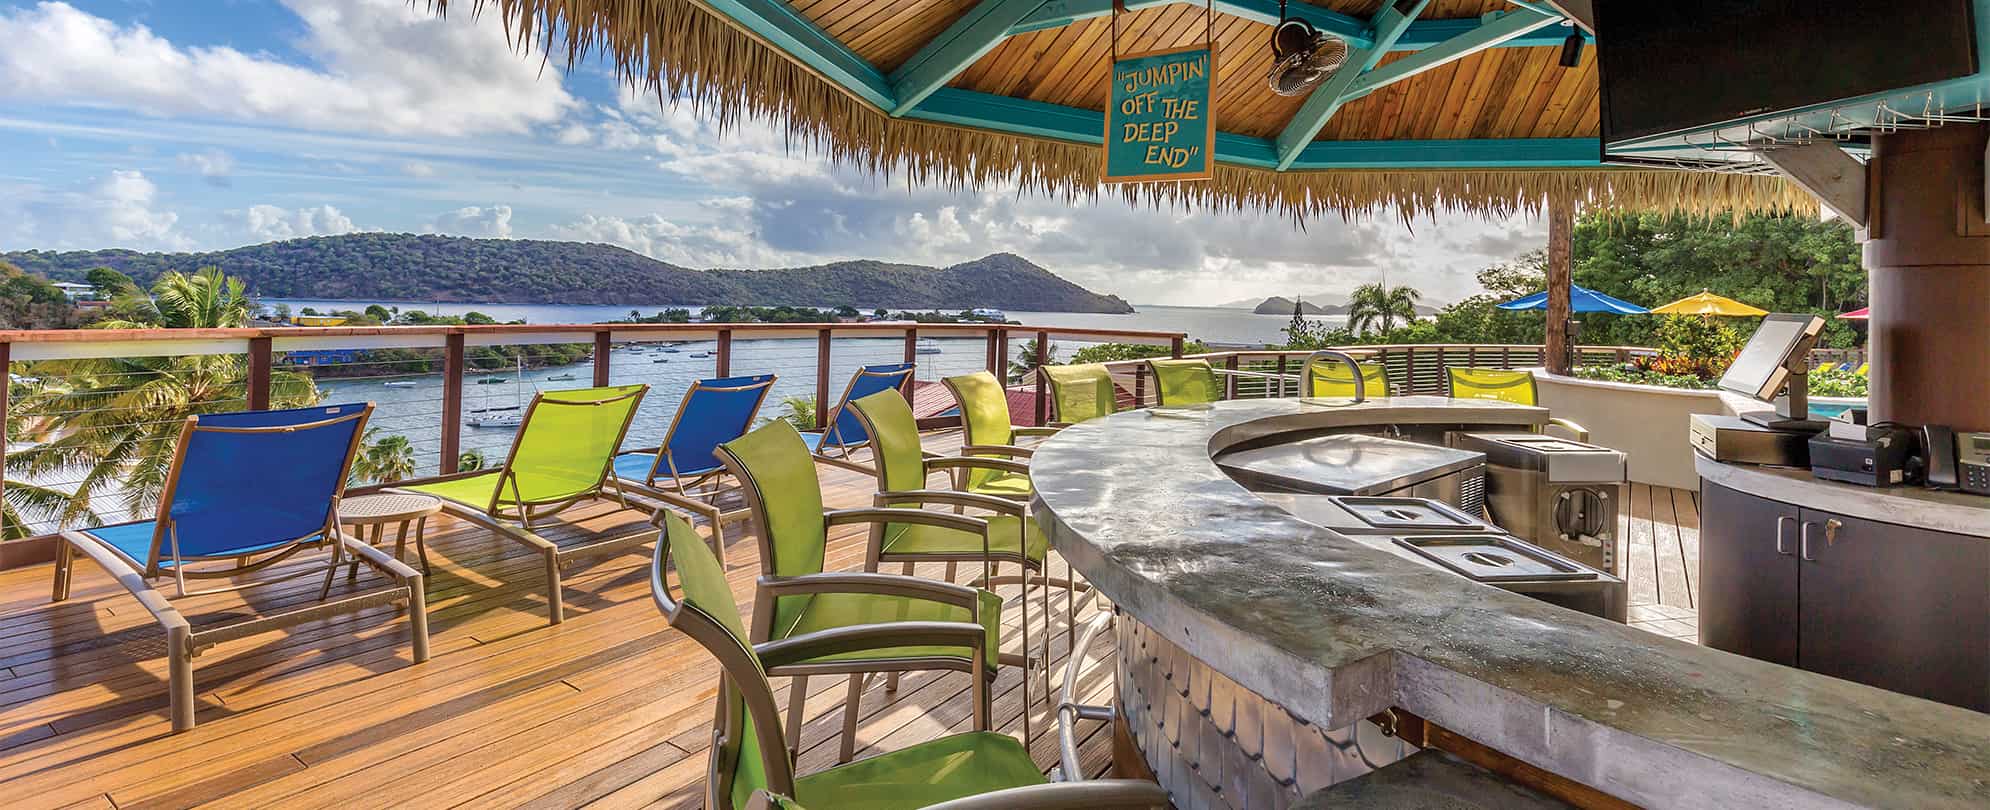 Bright blue and green chairs around a tiki bar overlooking the ocean at Margaritaville Vacation Club by Wyndham - St. Thomas